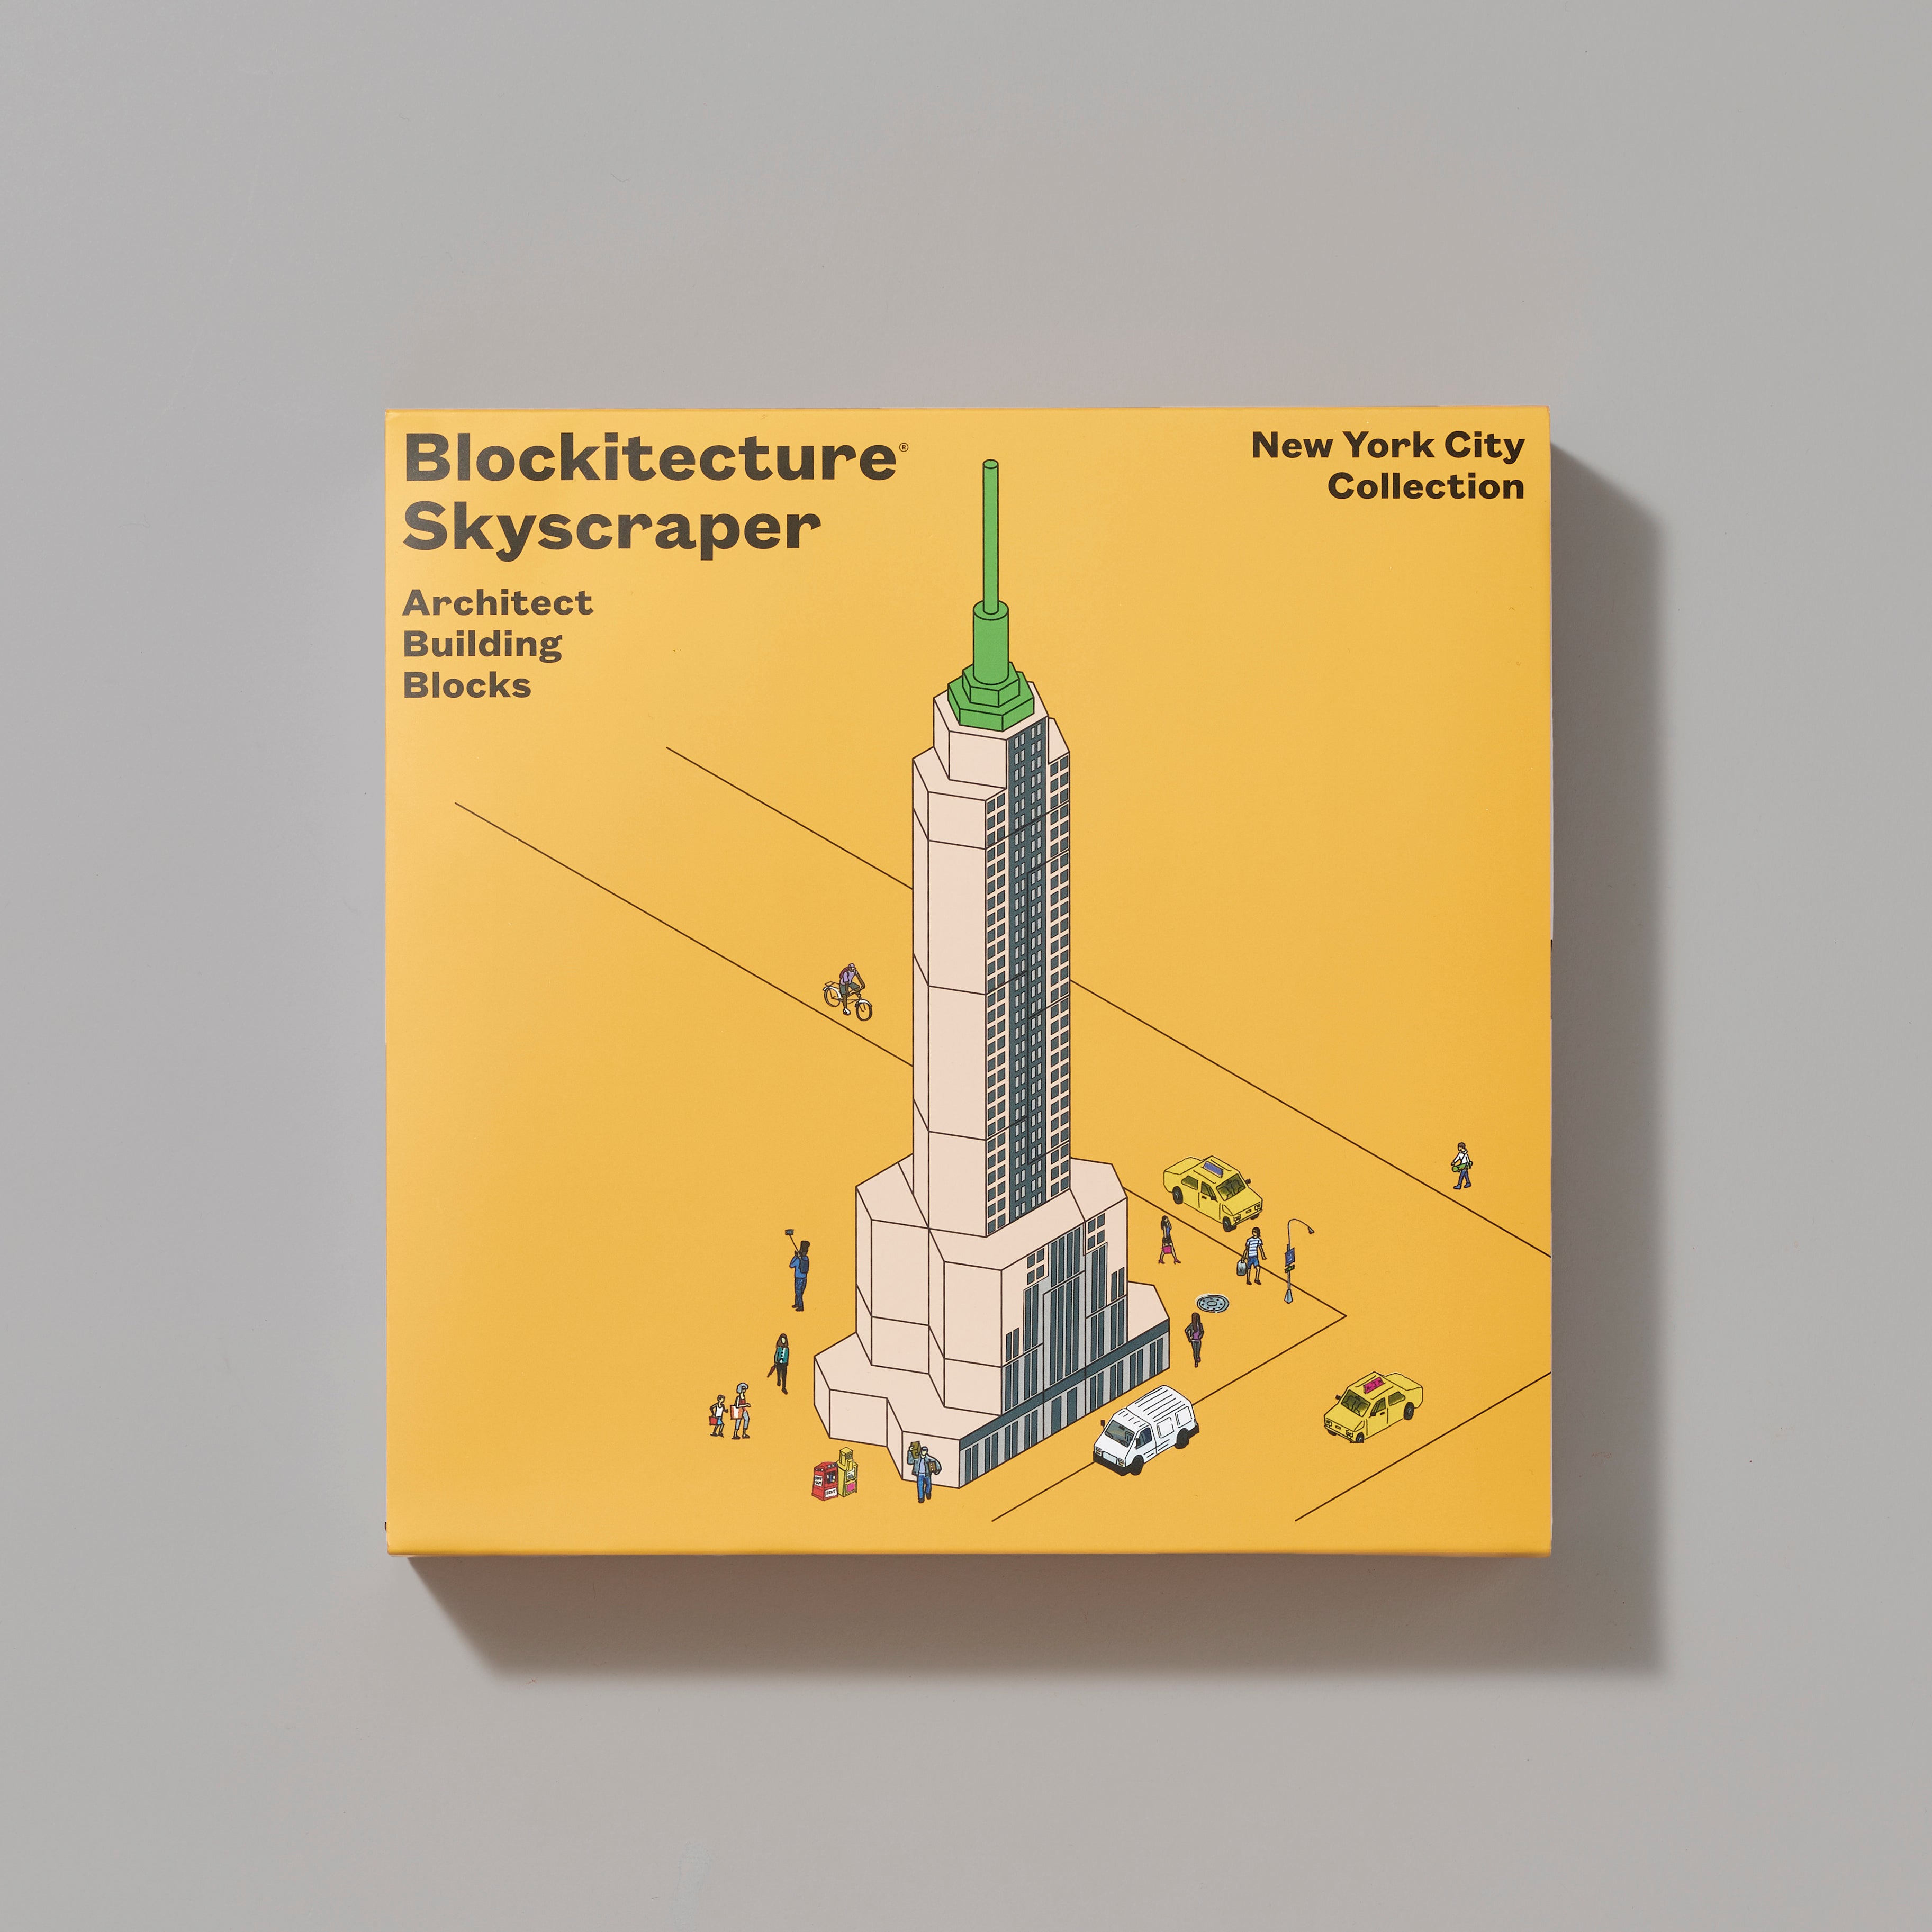 Packaging box for the assembled skyscraper building blocks